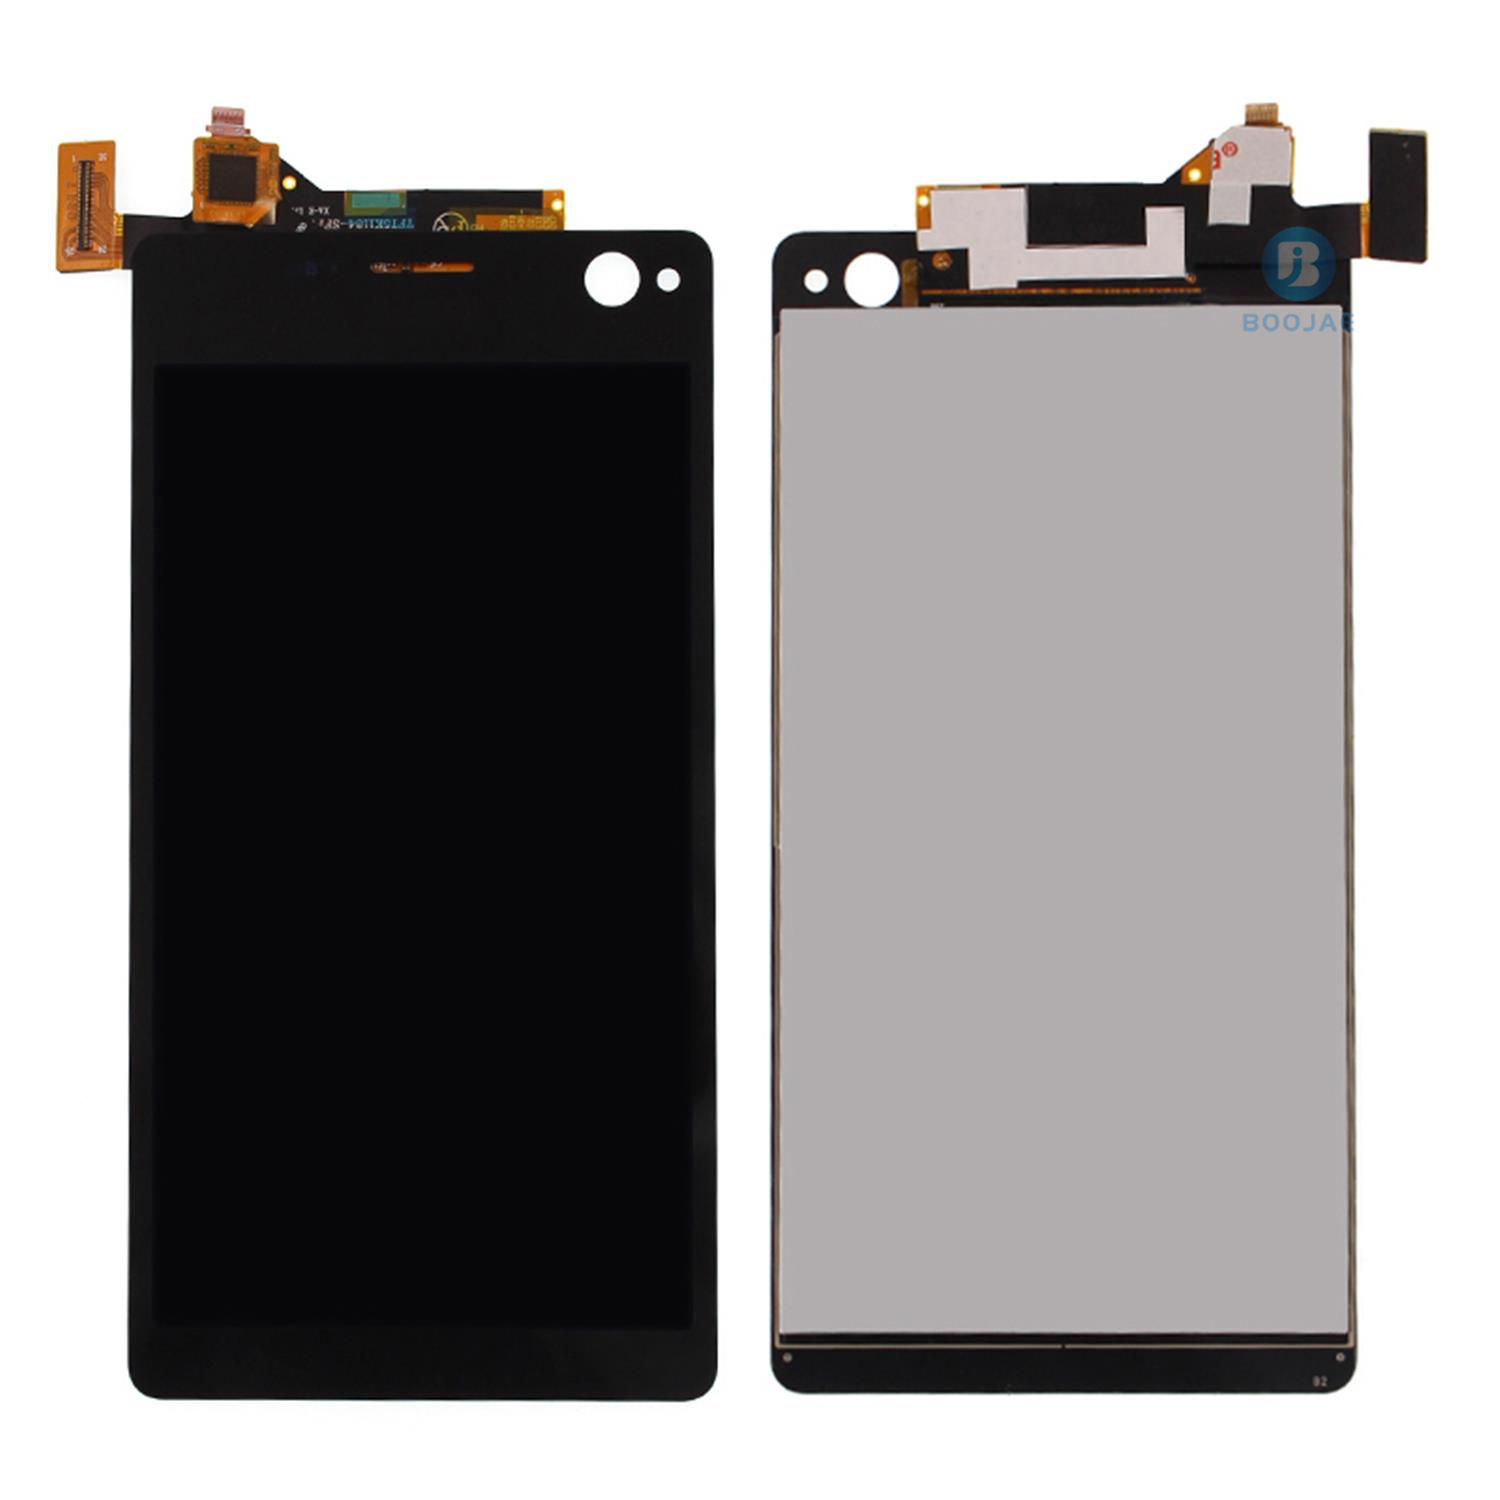 For Sony Xperia C4 LCD Screen Display and Touch Panel Digitizer Assembly Replacement